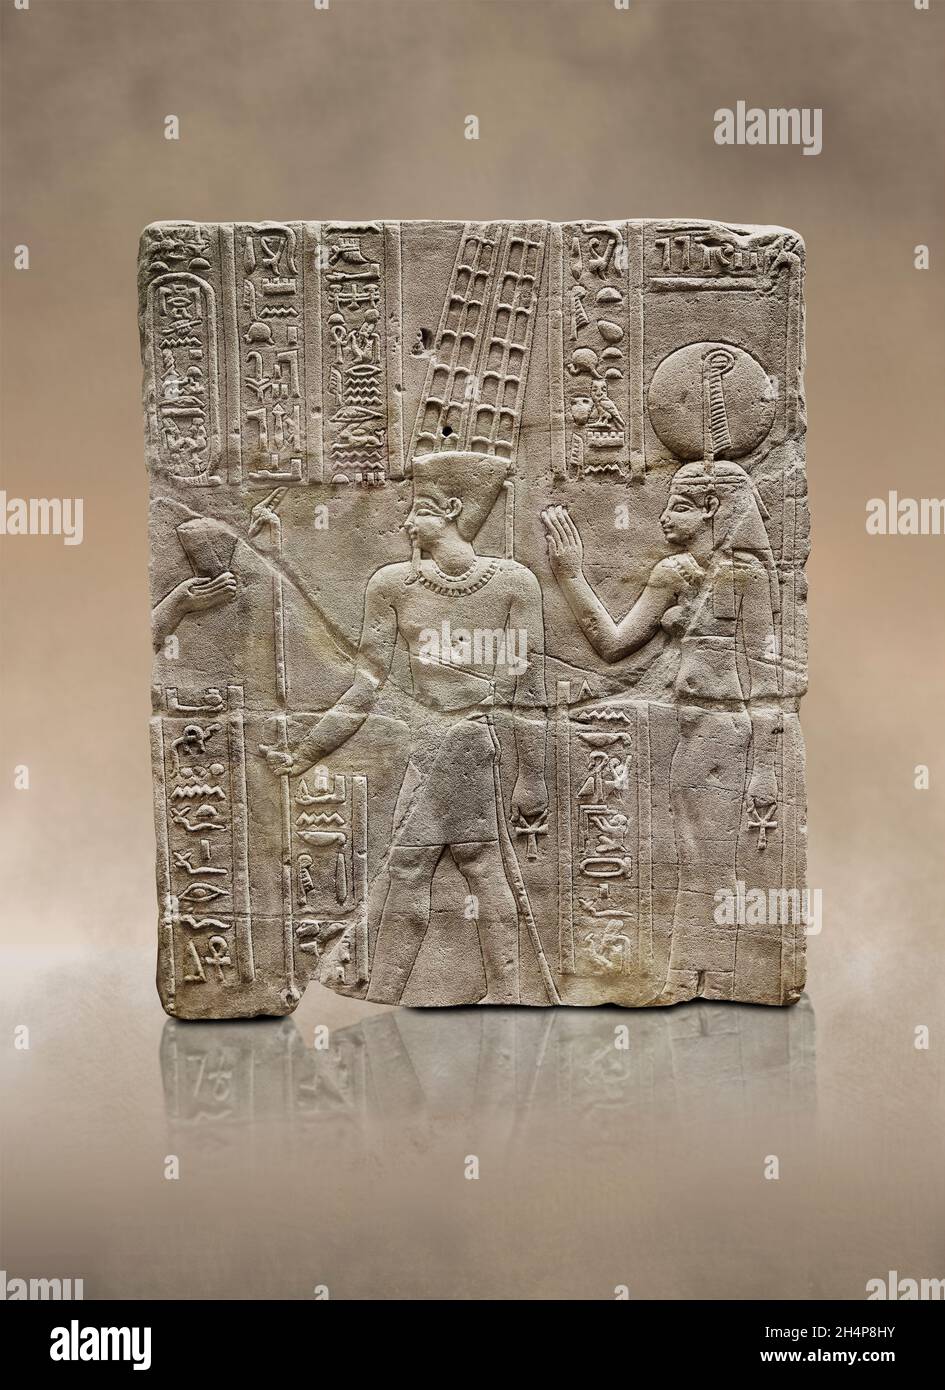 Ptolemy xiii hi-res stock photography and images - Alamy